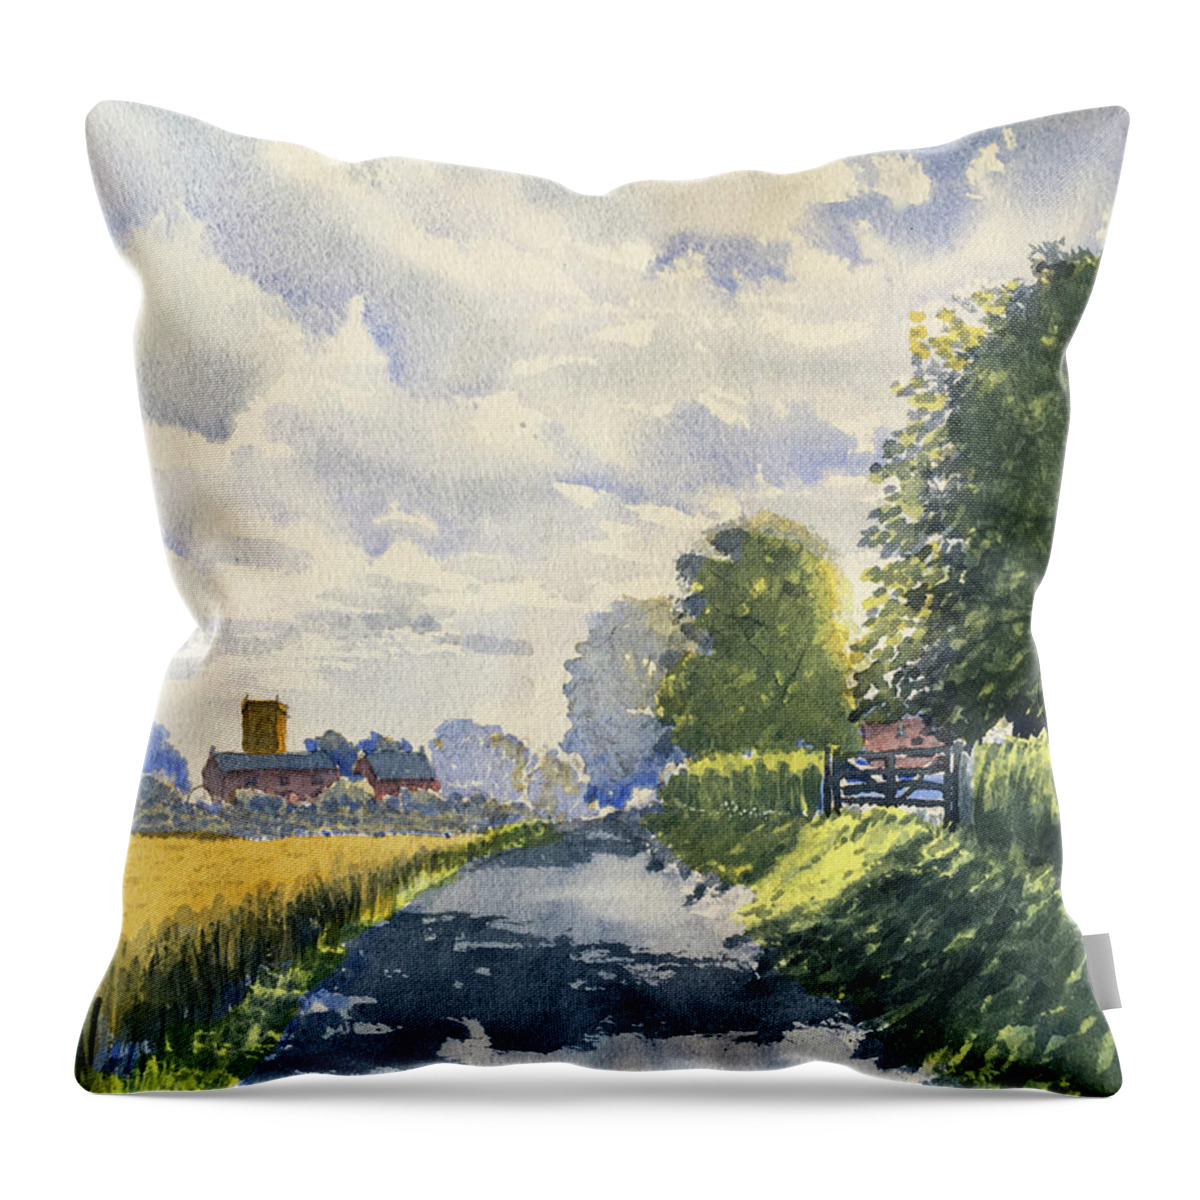 Watercolour Throw Pillow featuring the painting Harpham from Out Gate by Glenn Marshall